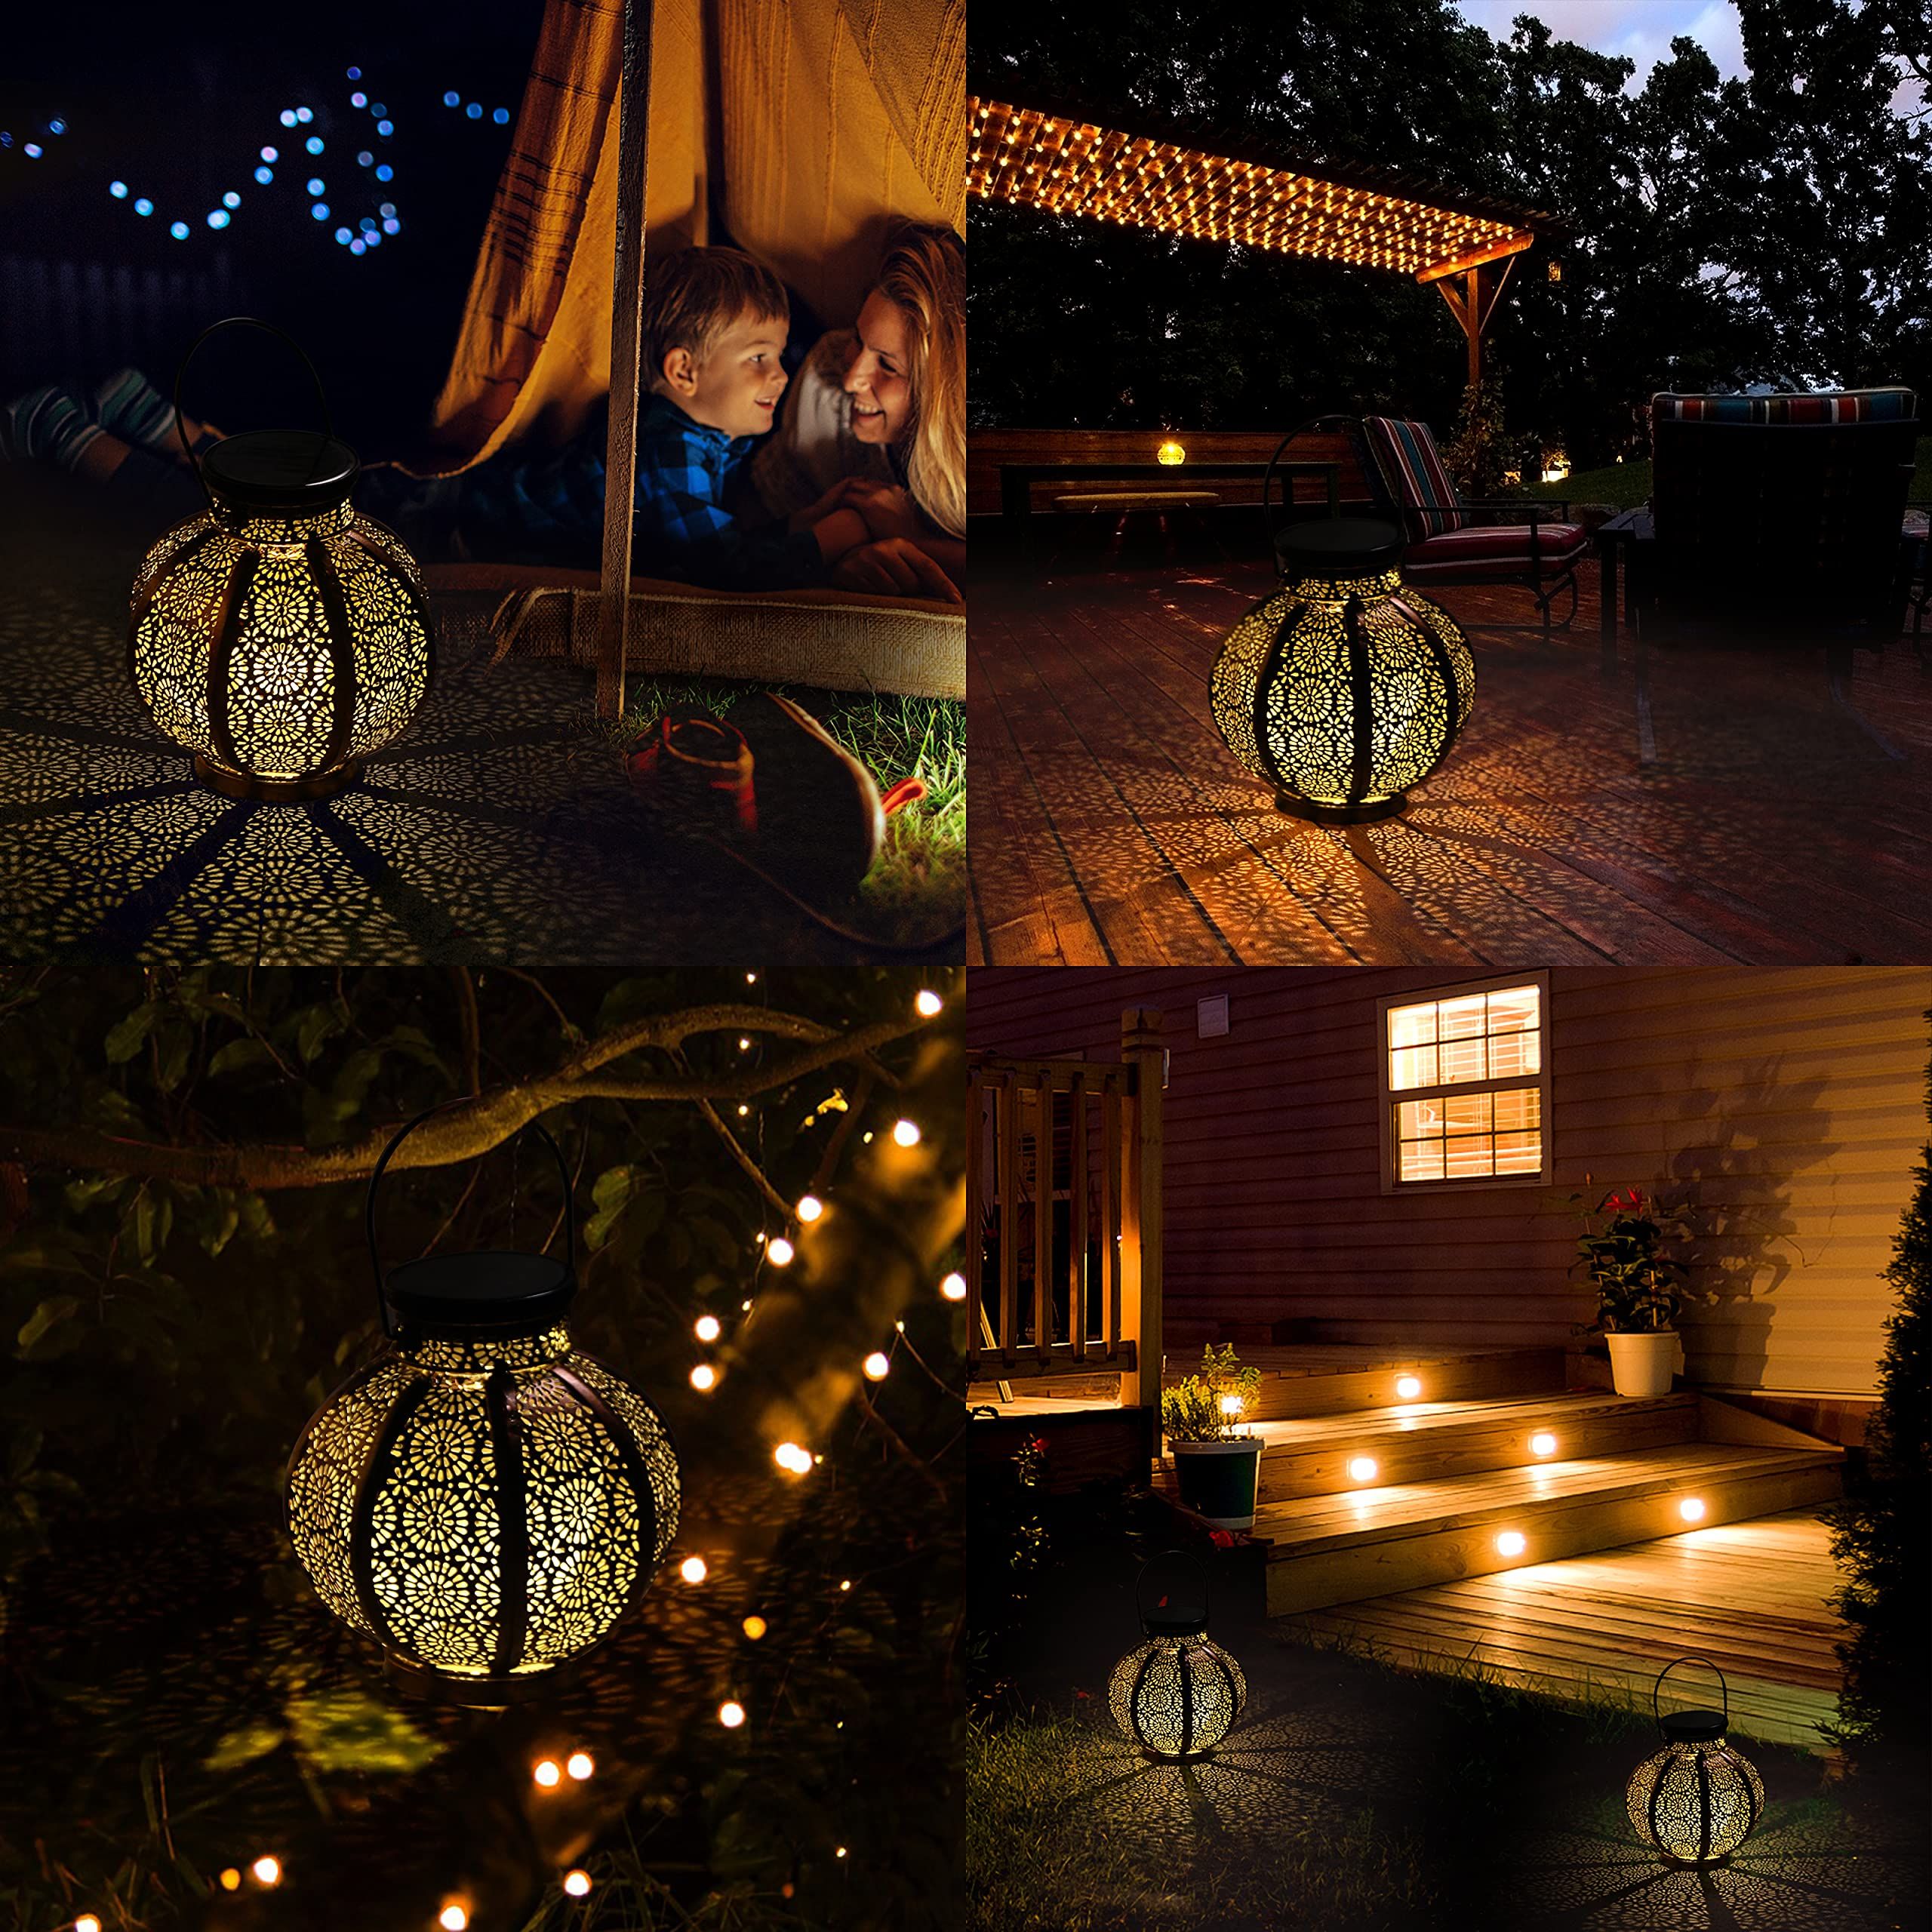 Outdoor Hanging Solar Lantern Light Copper Solar Lamp with Warm White fliament Bulbs for Garden Yard Pathway 